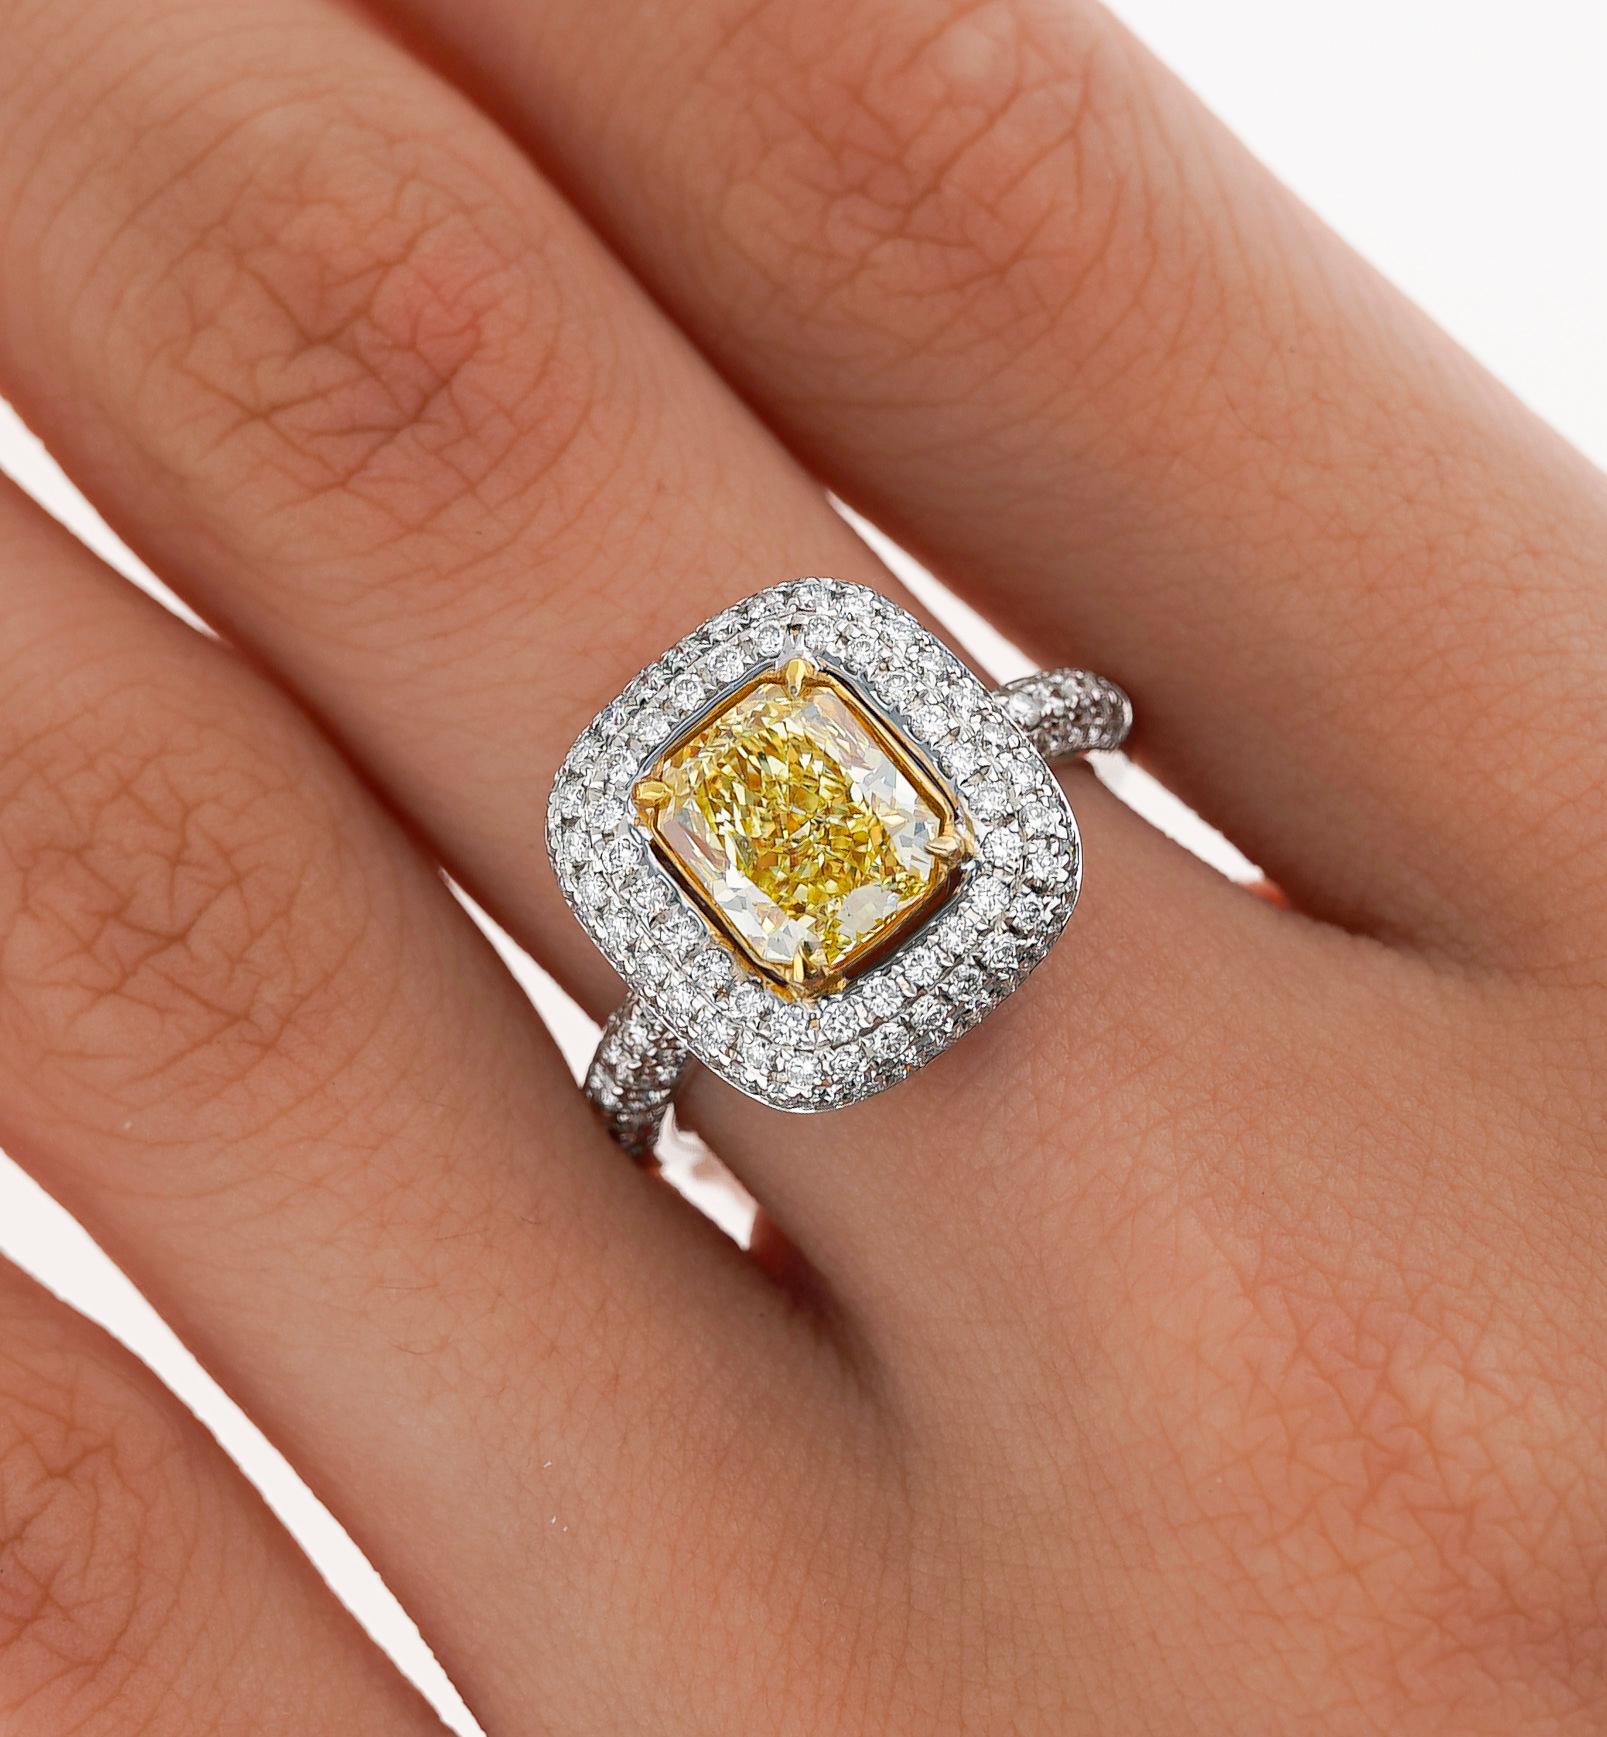 GIA Certified 2.35 Radiant Cut Fancy Yellow Diamond Ring in 18k White Gold For Sale 6